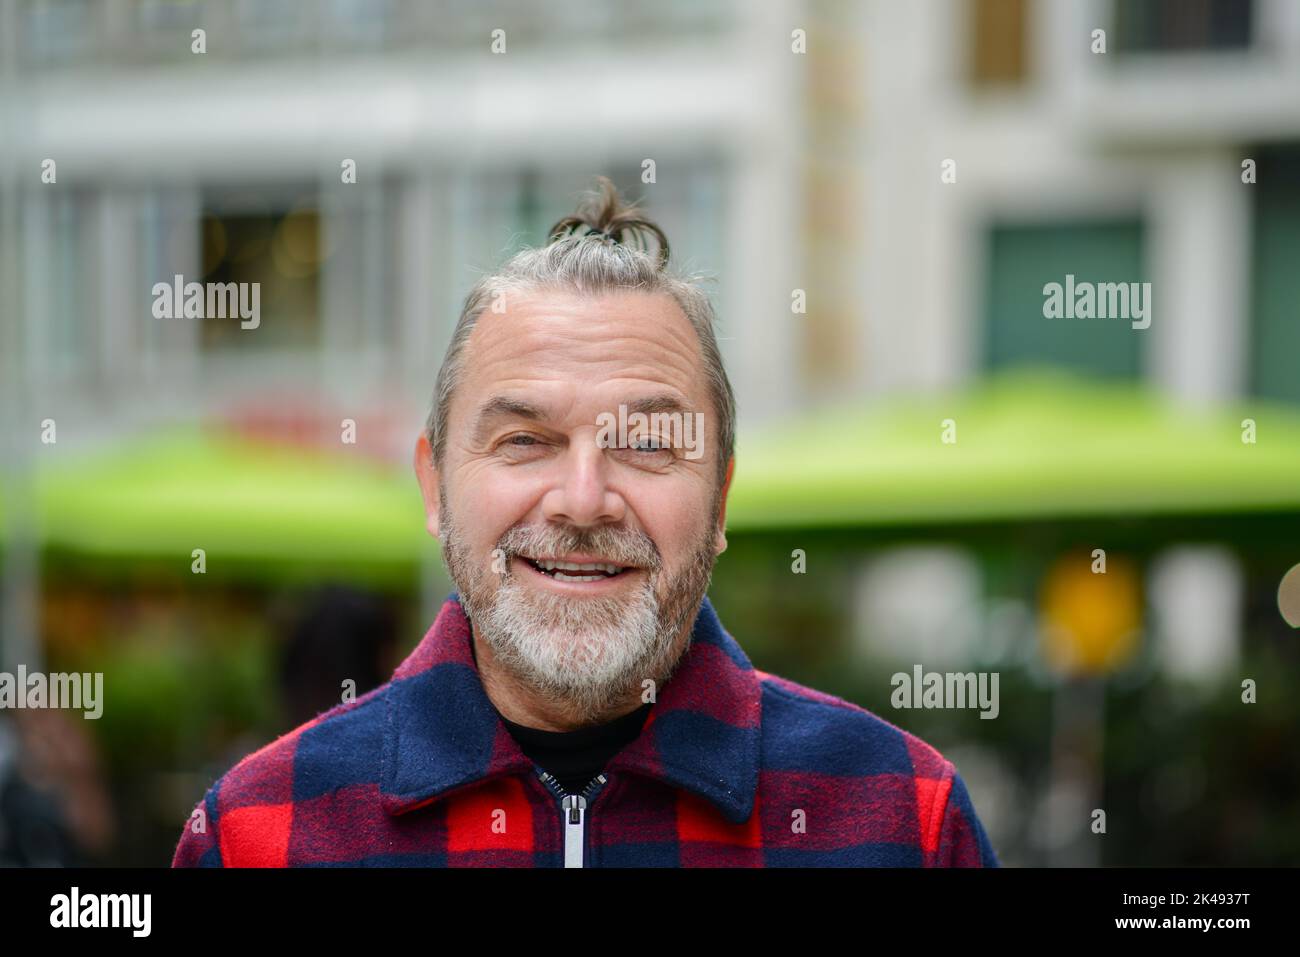 Middle aged man with a messy bun in a red and blue lumberjack style jacket is standing in a shopping street with a mischievous smile Stock Photo